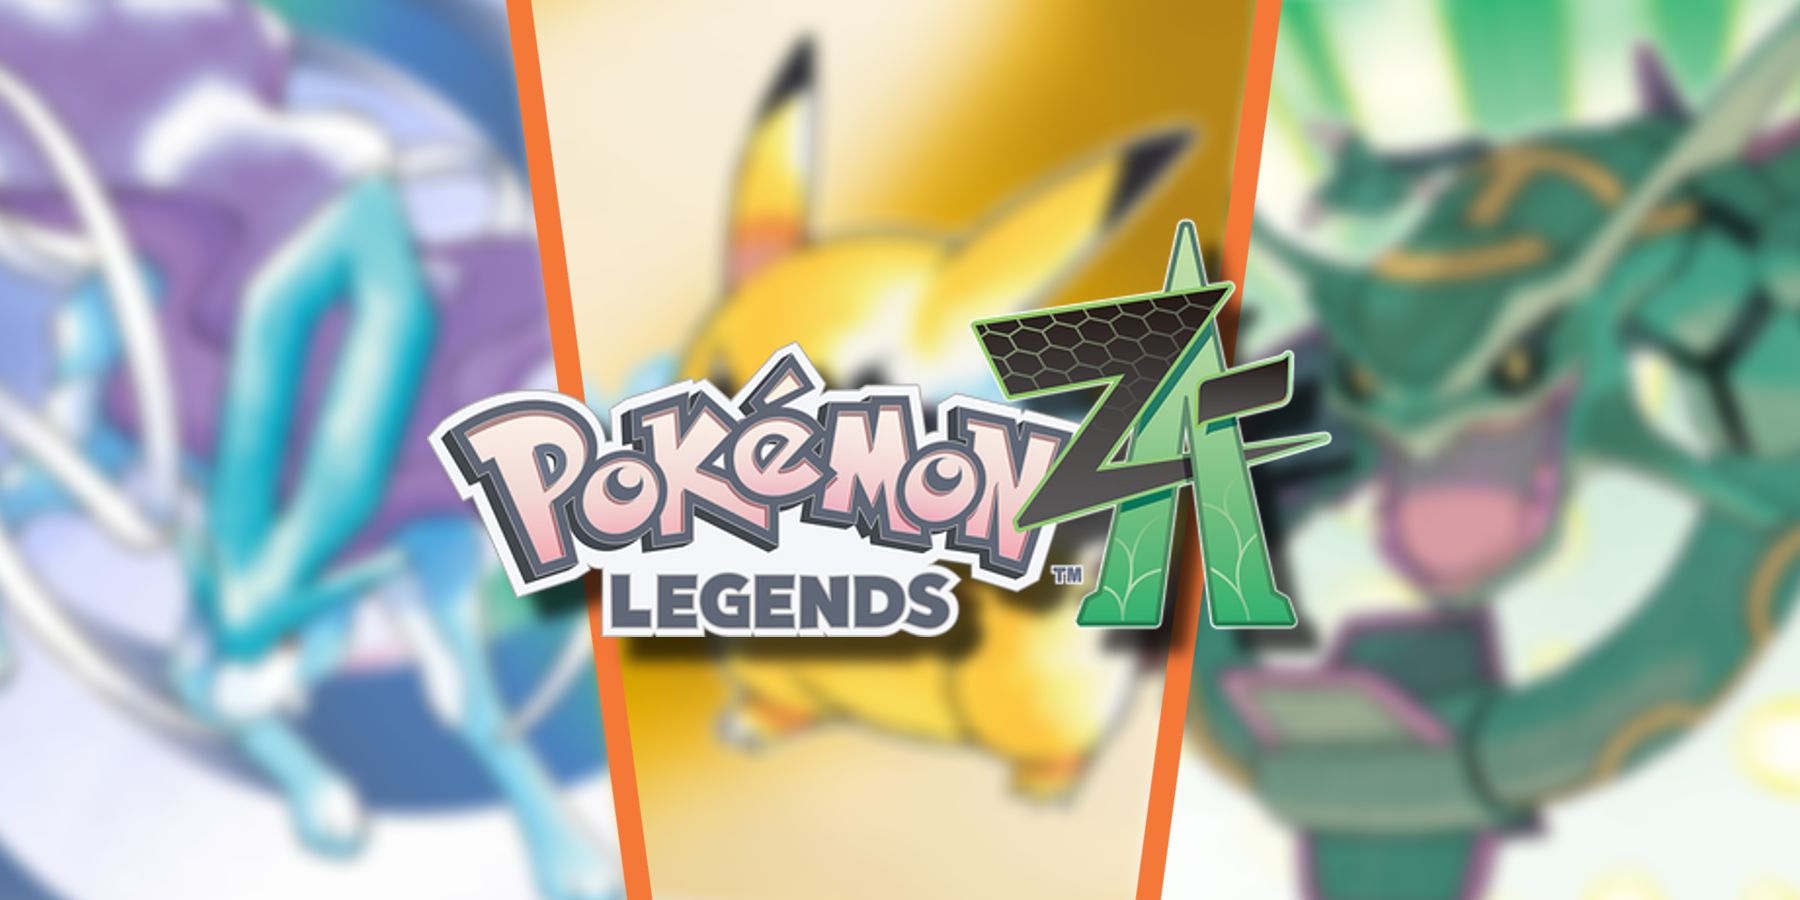 Pokemon Legends Z-A Offers Hope For a Lost Series Tradition